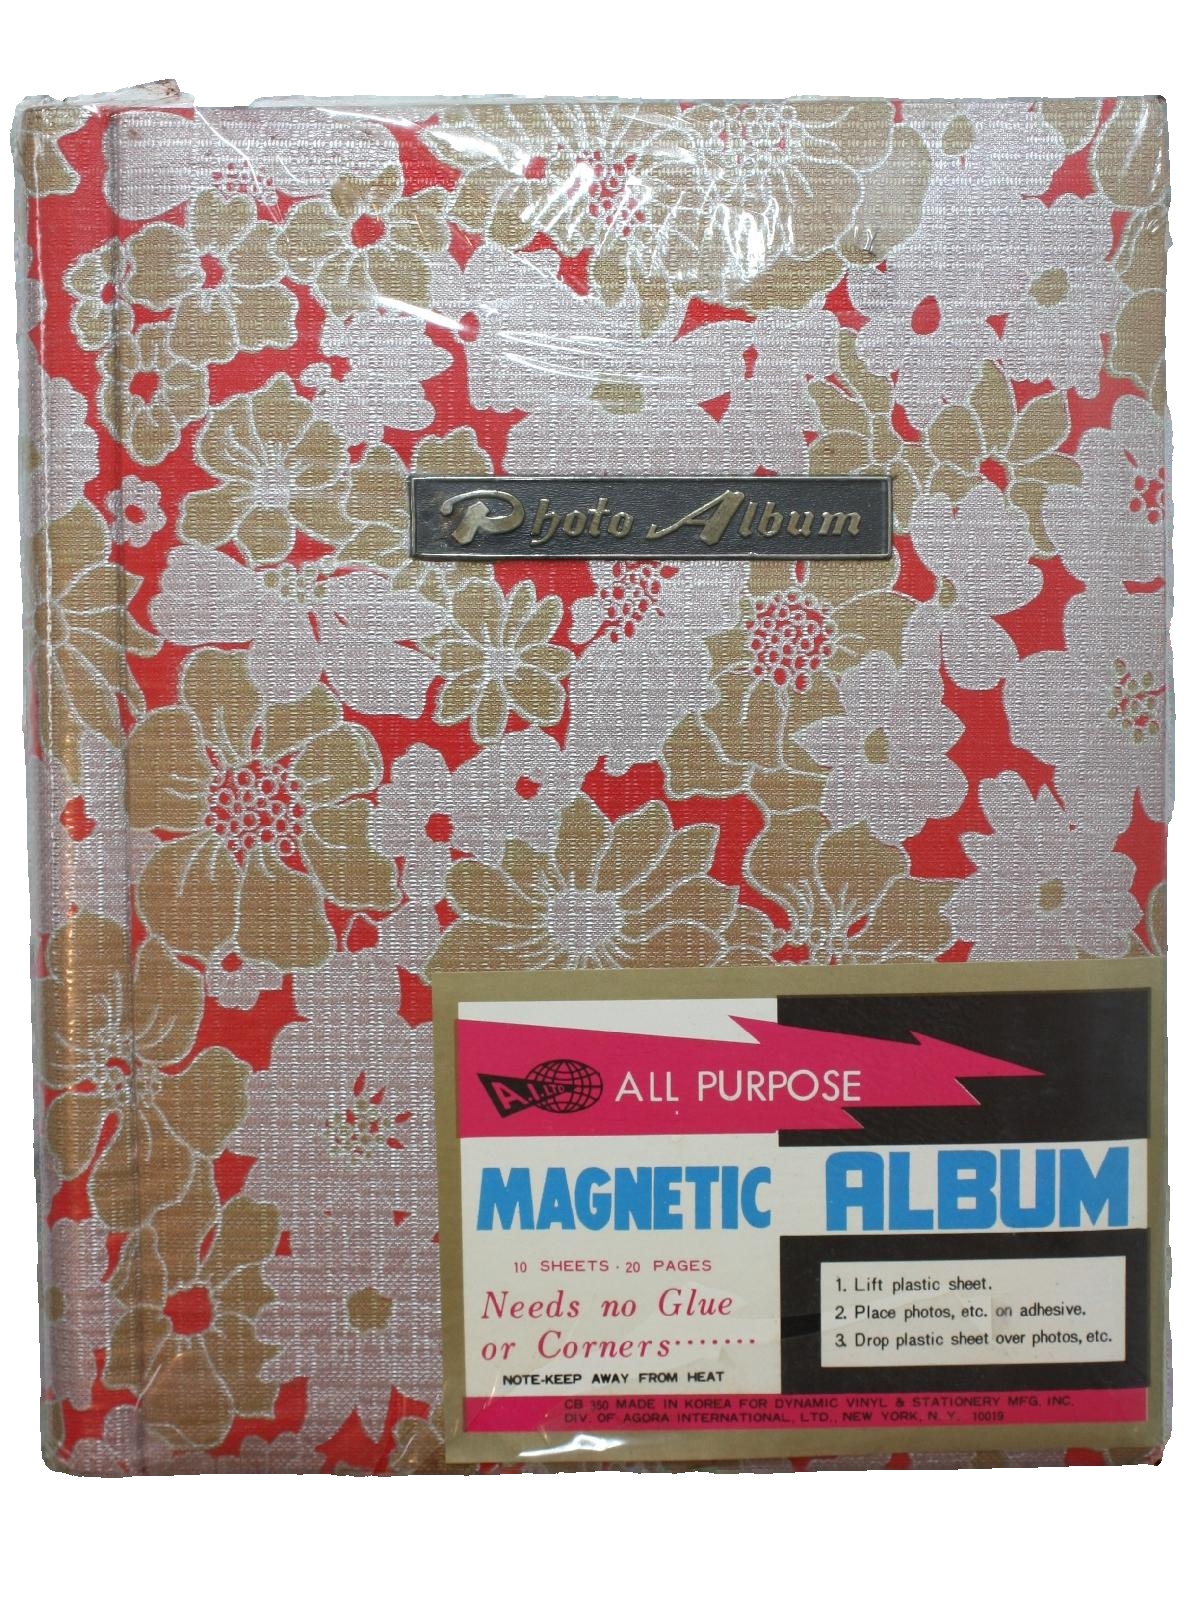 Seventies Vintage Home Decor: 70s -A I Ltd- Amazing magnetic photo album  with cool silver, red and gold floral print cover. Album has 10 sheets and  20 pages, need no glue or